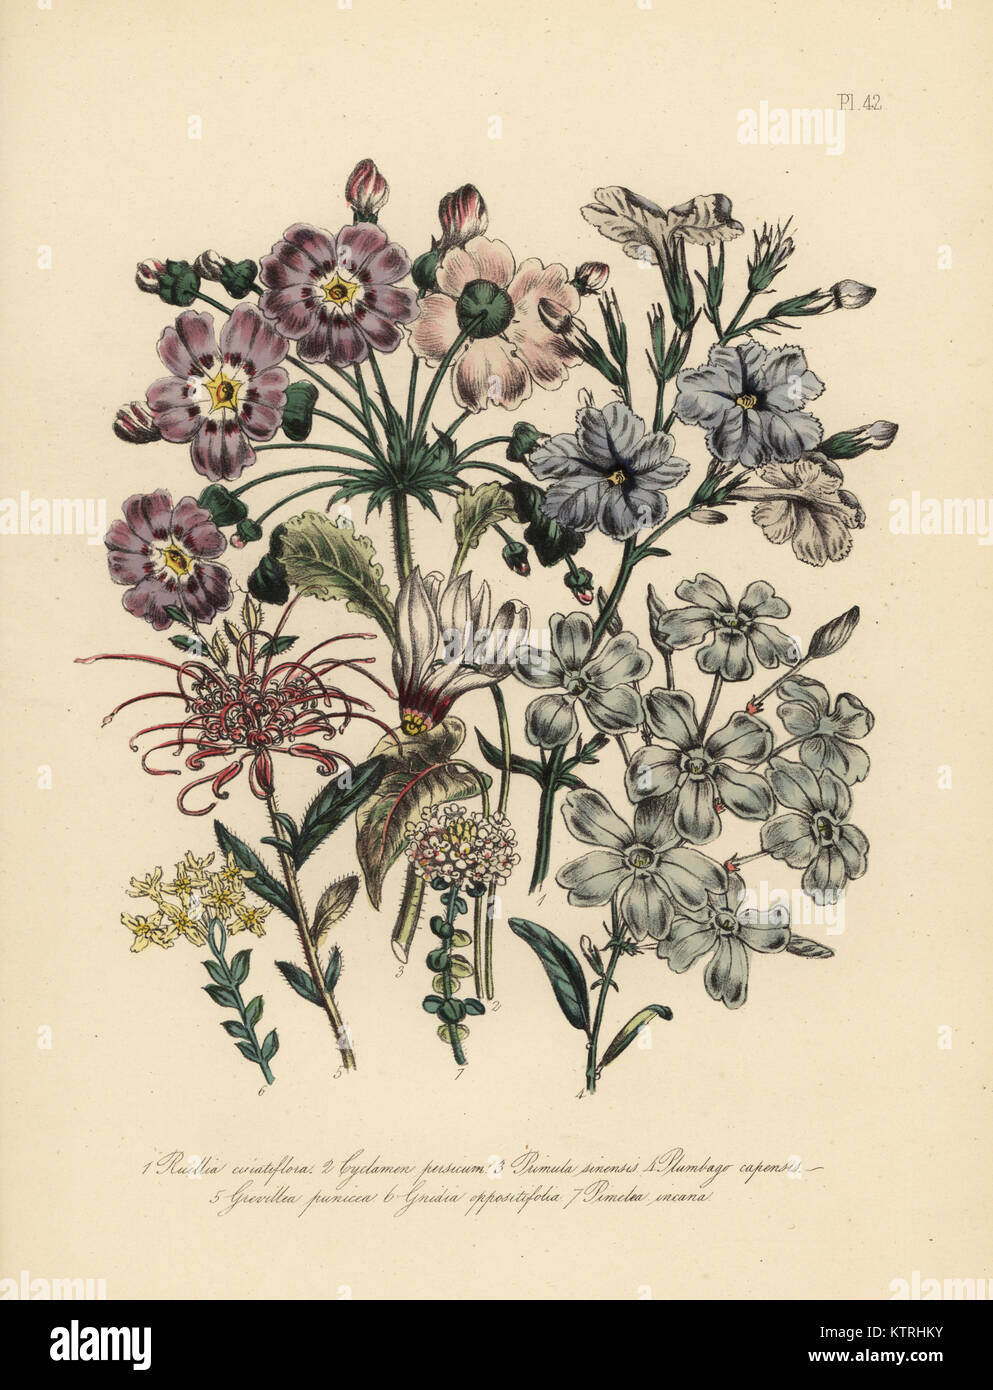 Fringe-flowered ruellia, Ruellia ciliatiflora, Persian cyclamen, Cyclamen persicum, Chinese primrose, Primula sinensis, Cape leadwort, Plumbago capensis, crimson grevillea, Grevillea punicea, opposite-leaved gnidia, Gnidia oppositifolia, and hoary pimelea, Pimelea incana. Handfinished chromolithograph by Henry Noel Humphreys after an illustration by Jane Loudon from Mrs. Jane Loudon's Ladies Flower Garden or Ornamental Greenhouse Plants, William S. Orr, London, 1849. Stock Photo